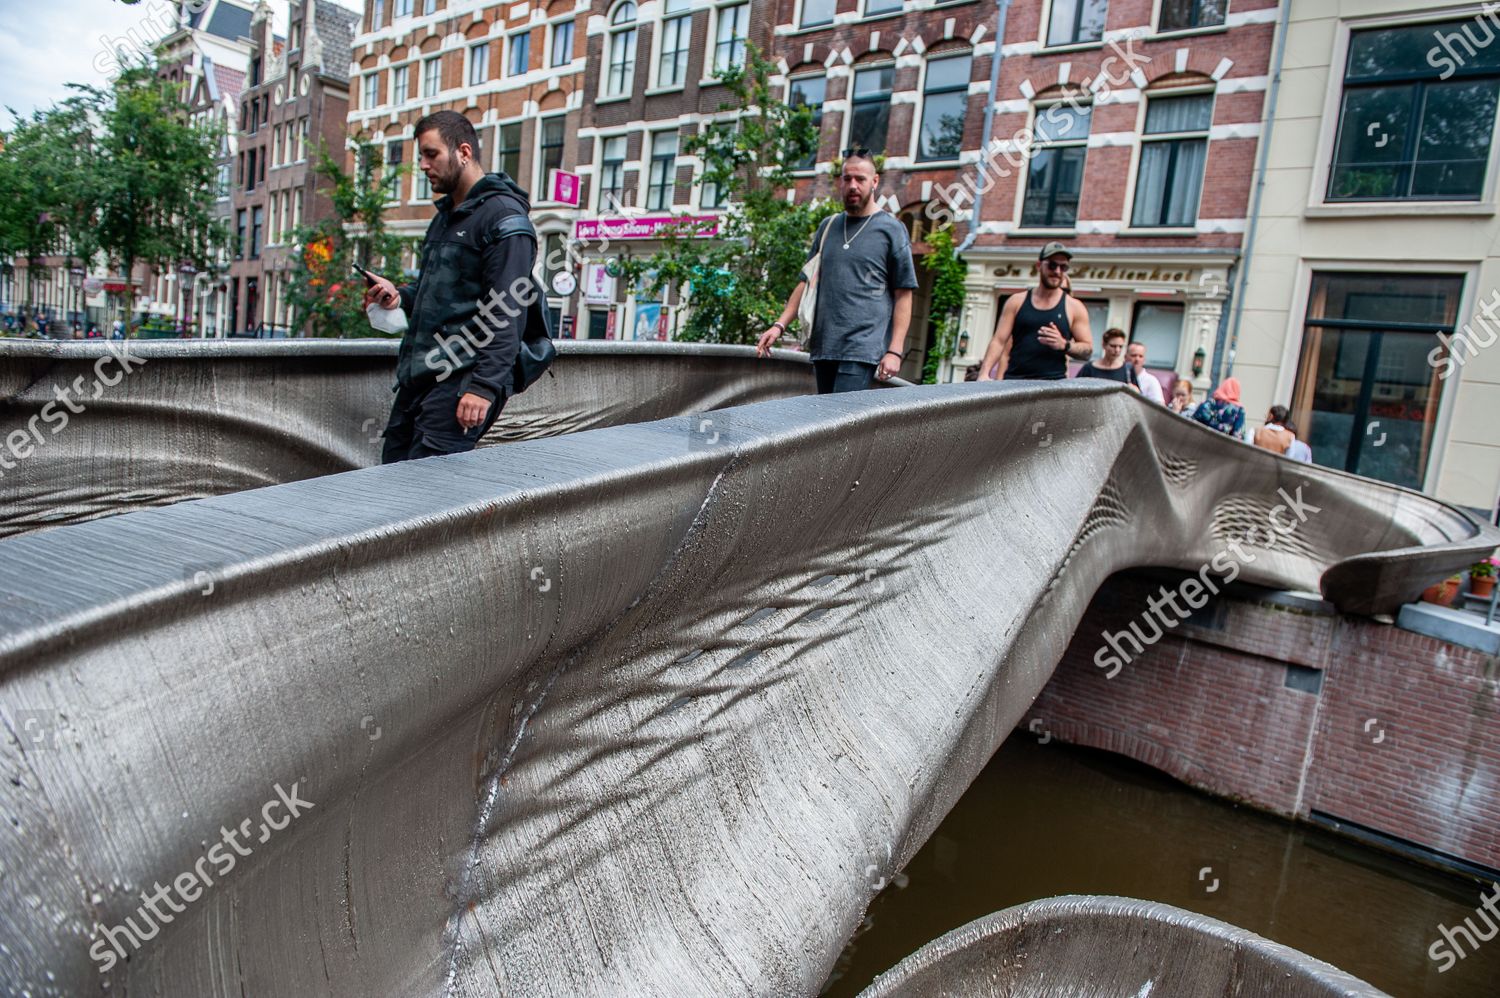 World's first 3D-printed stainless steel bridge spans Dutch canal